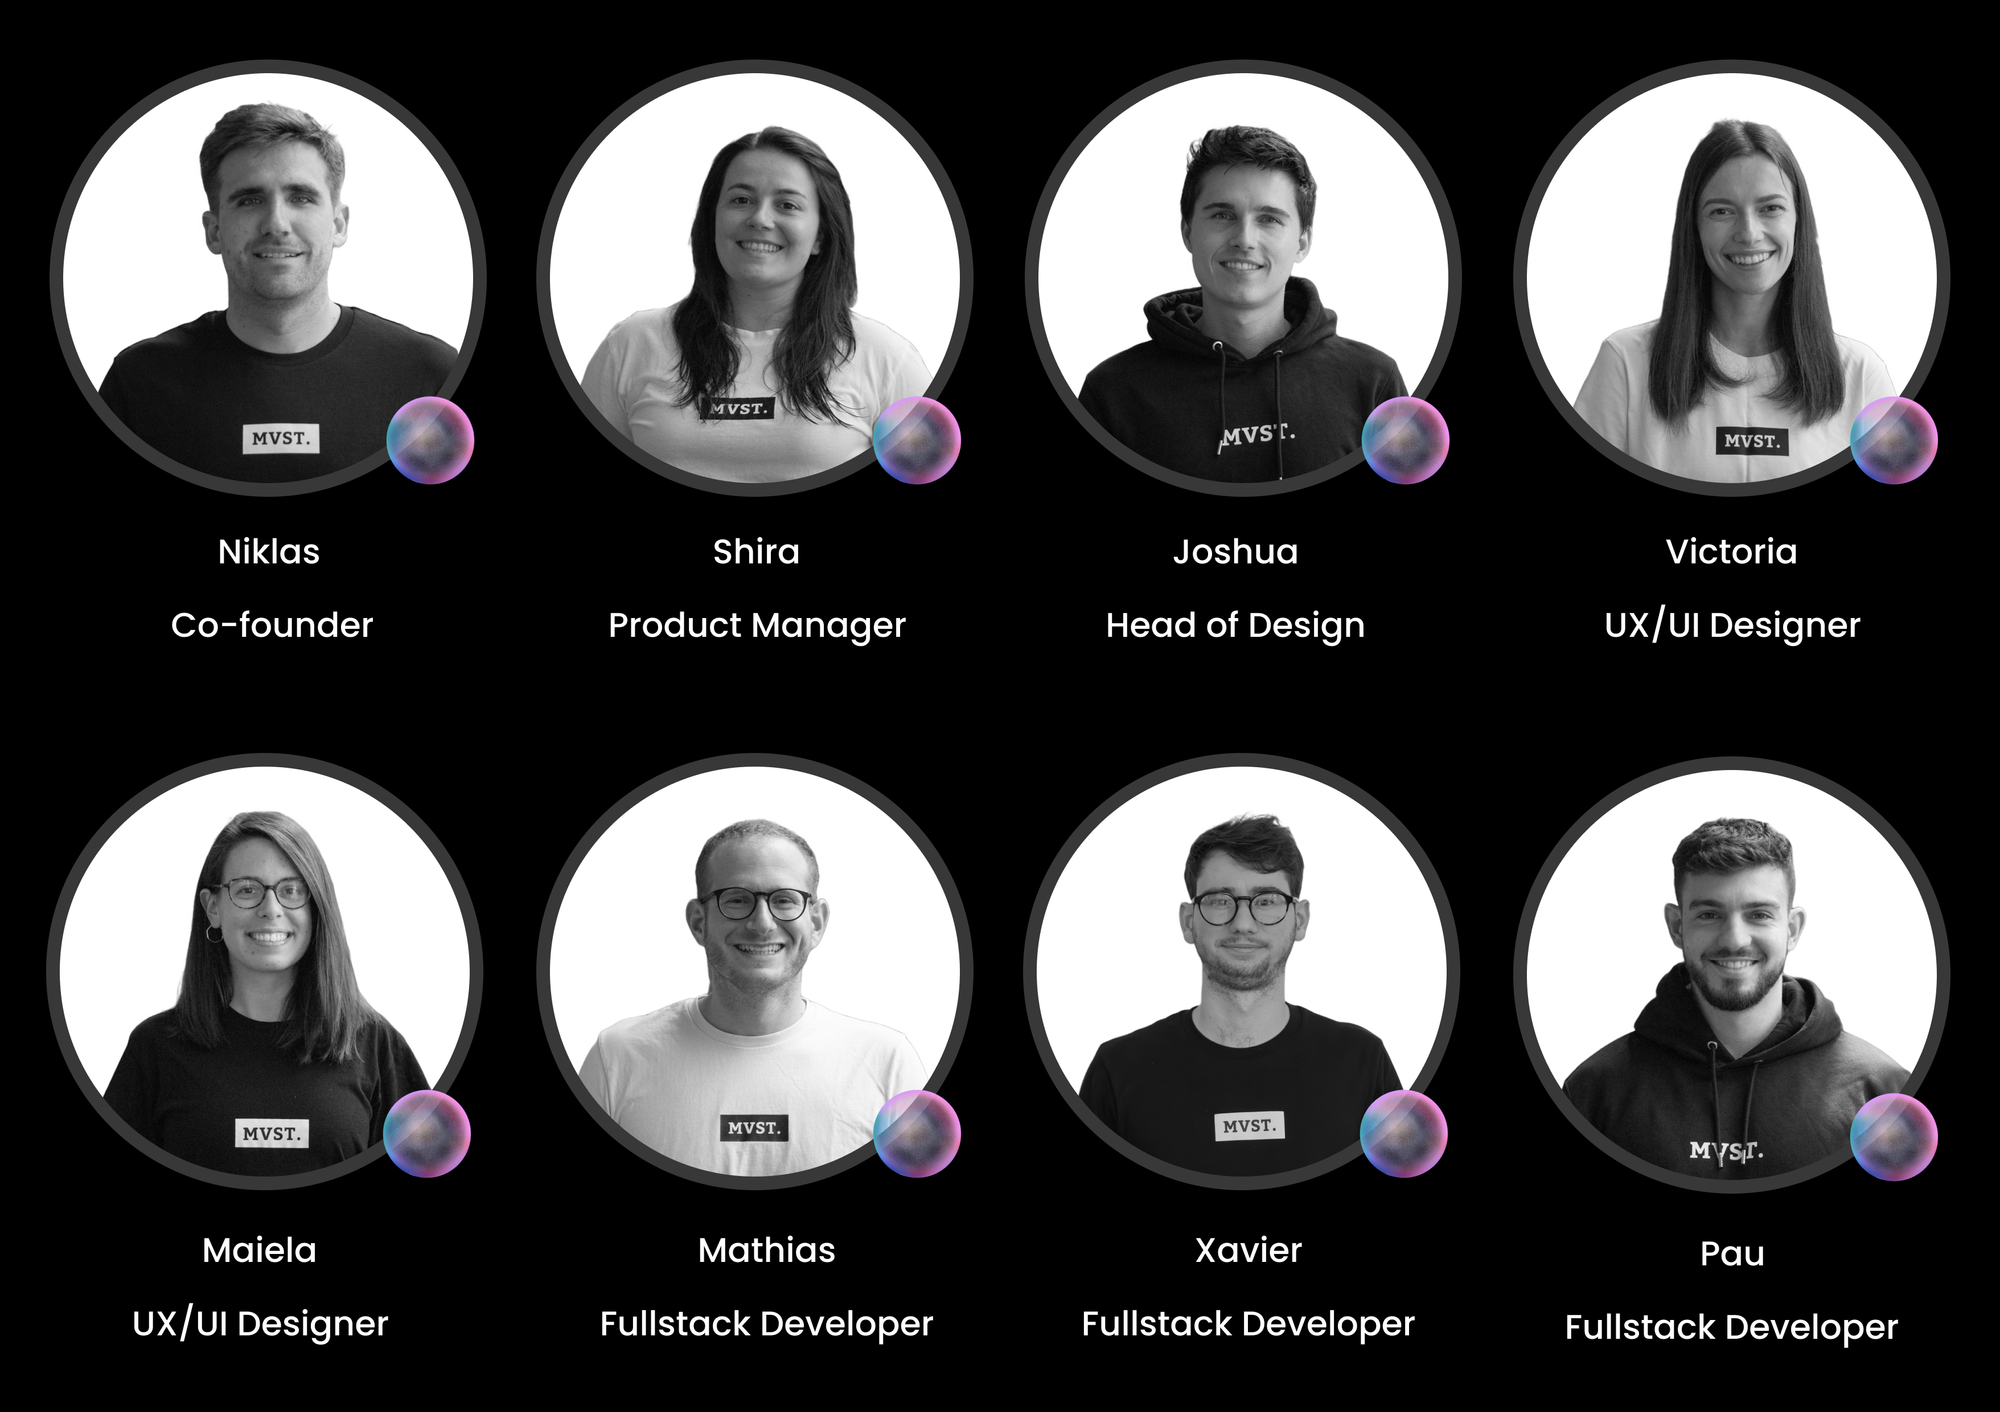 Buycycle's dedicated MVST team photos, names and roles